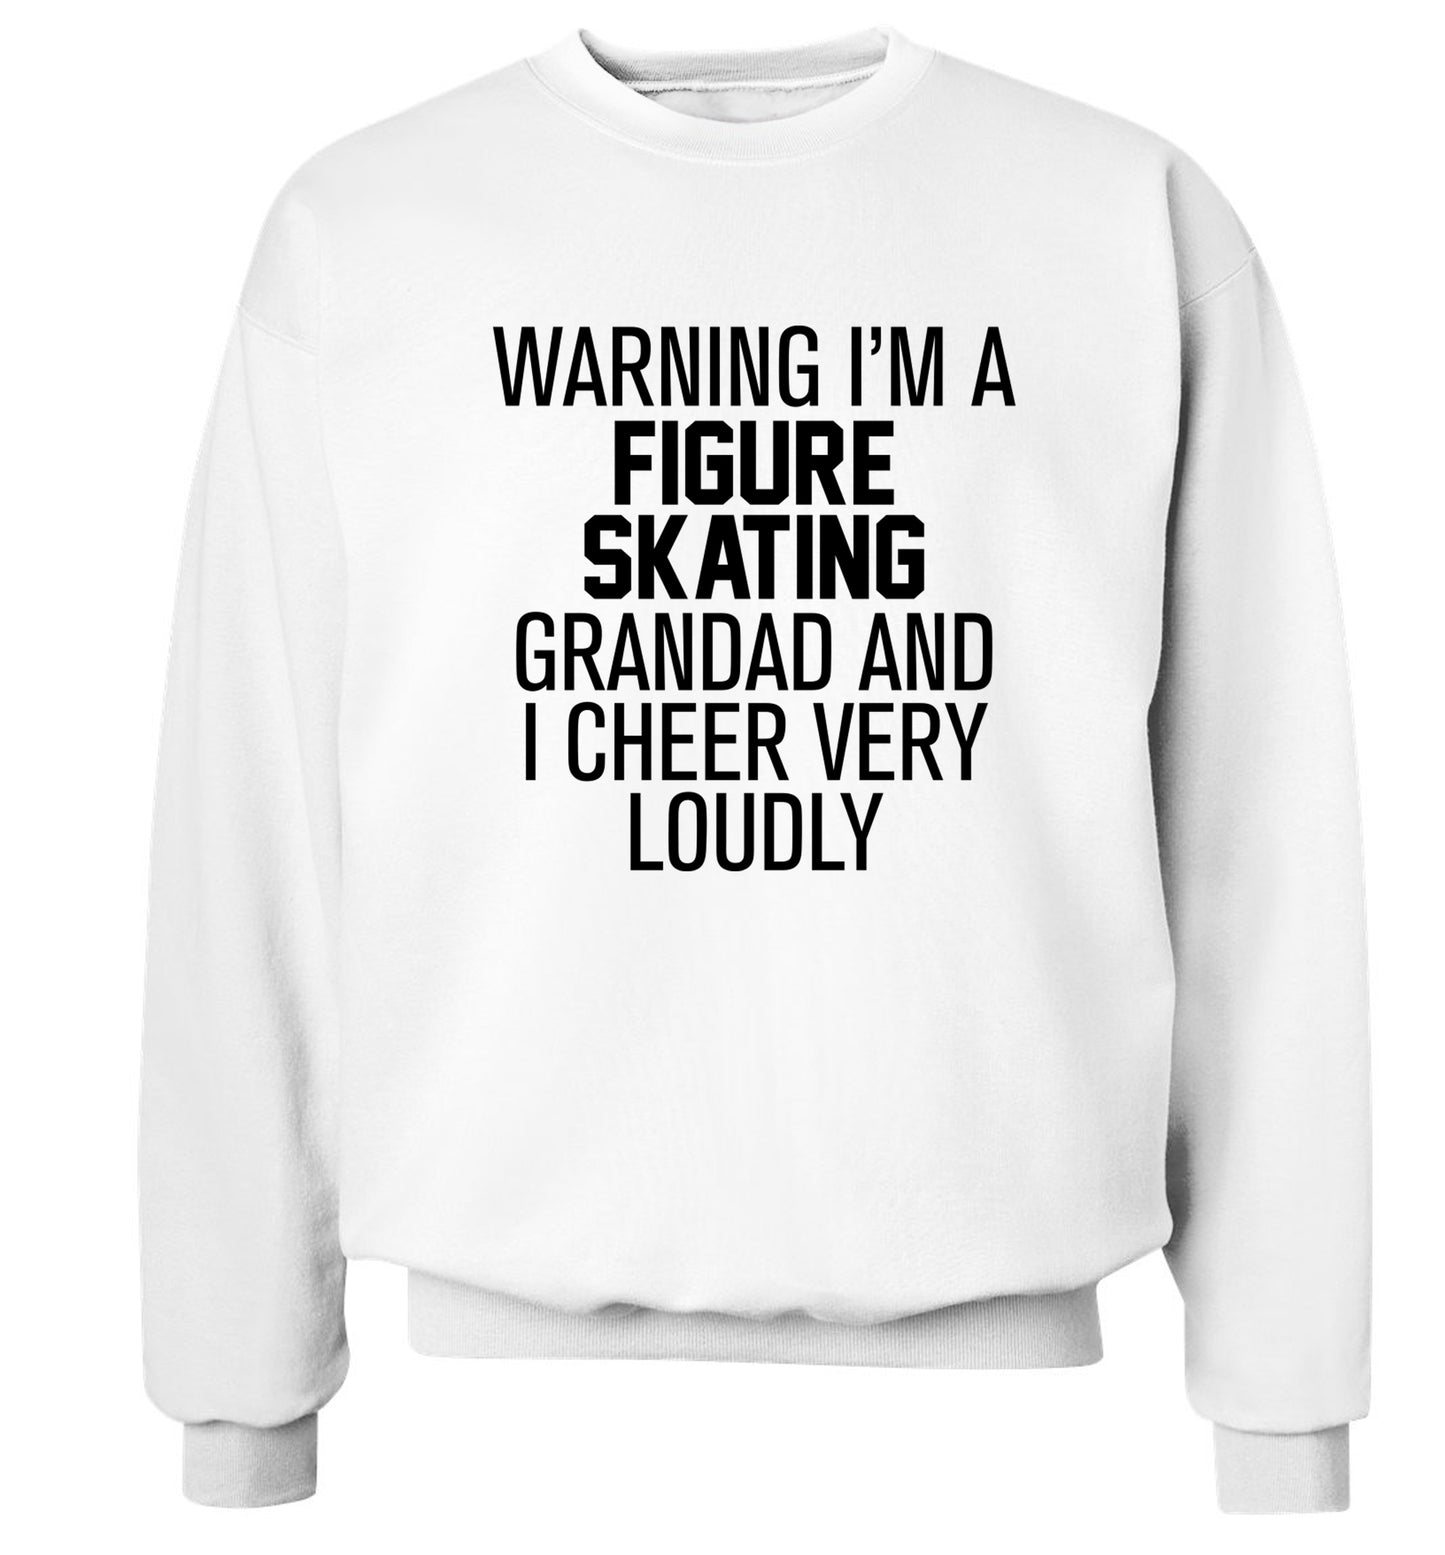 Warning I'm a figure skating grandad and I cheer very loudly Adult's unisexwhite Sweater 2XL